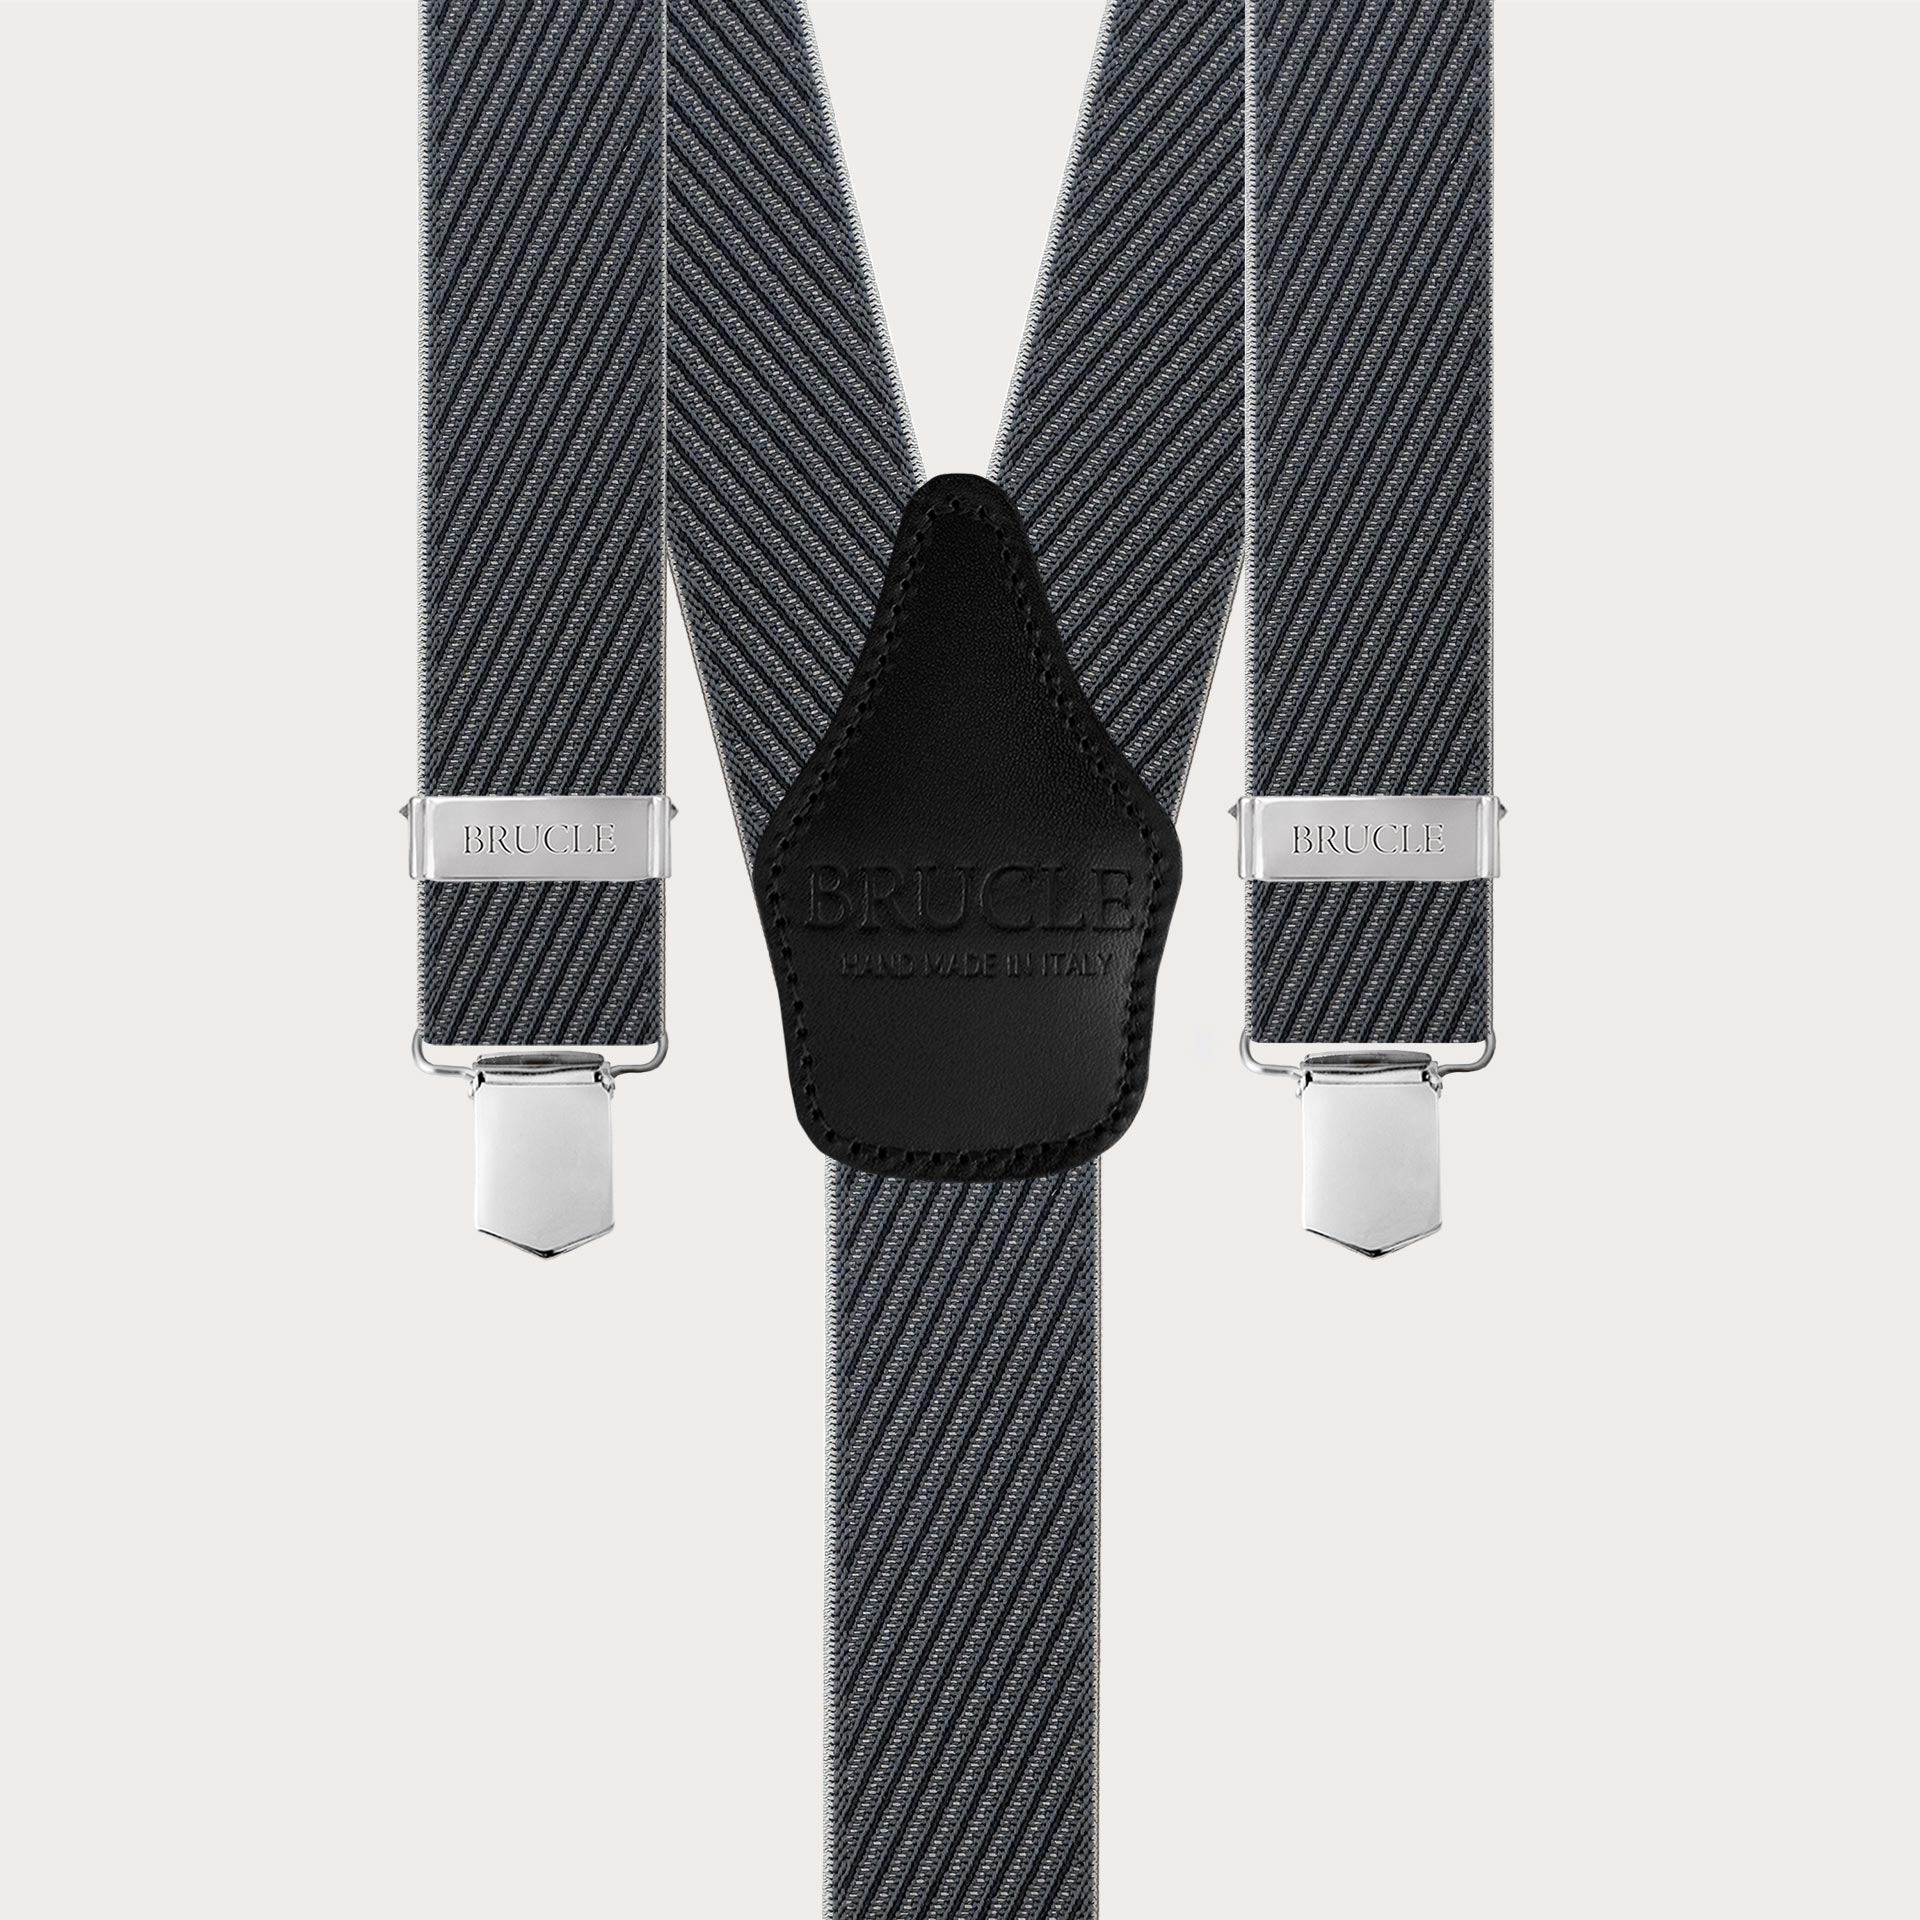 Black and grey striped elastic suspenders with clips